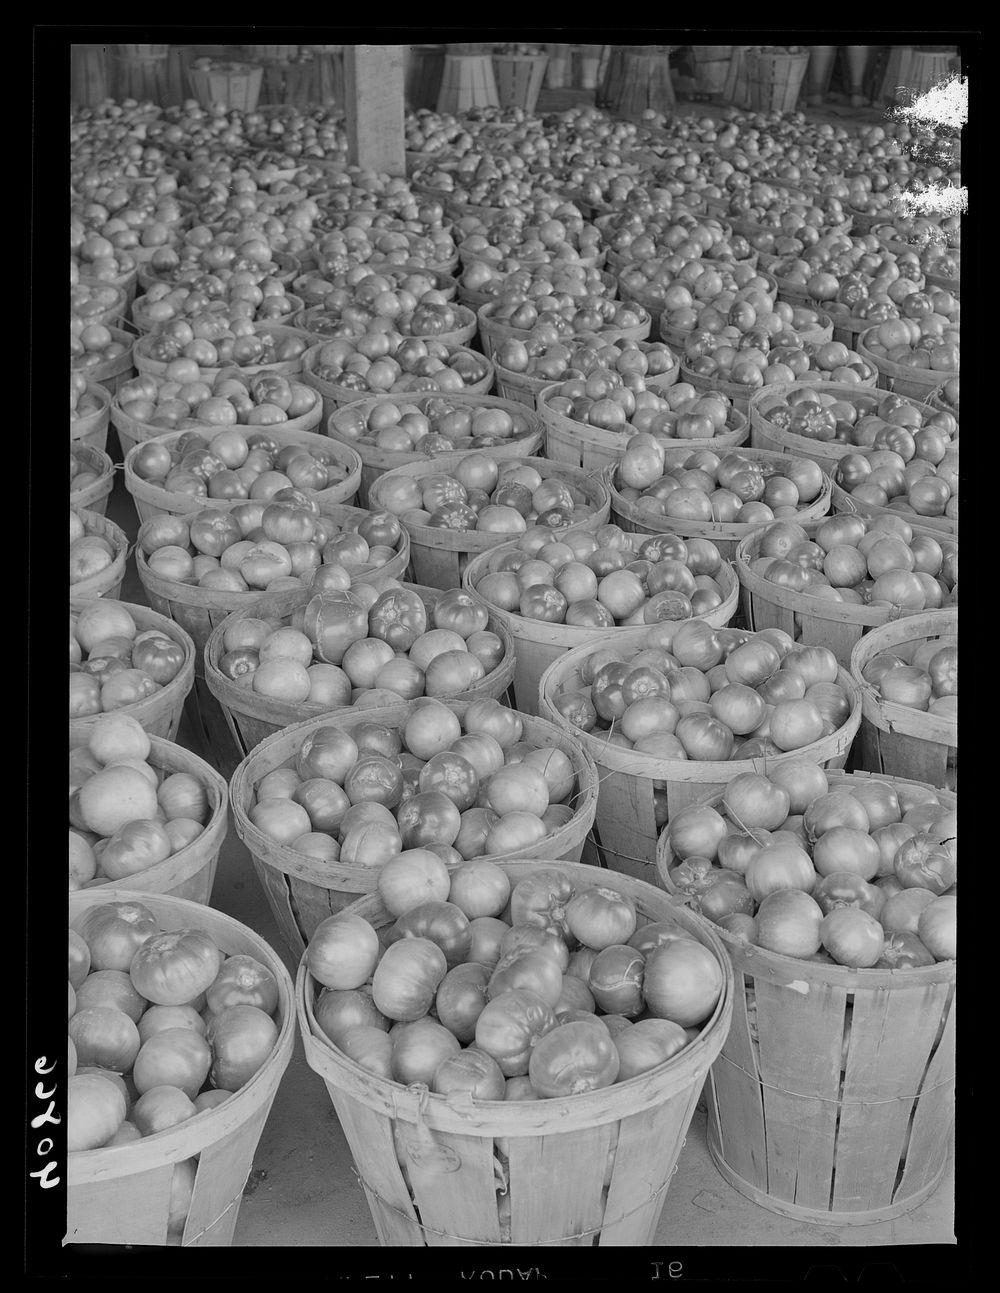 Green tomatoes at the Kings Creek Packing Company. Kings Creek, Maryland. Sourced from the Library of Congress.